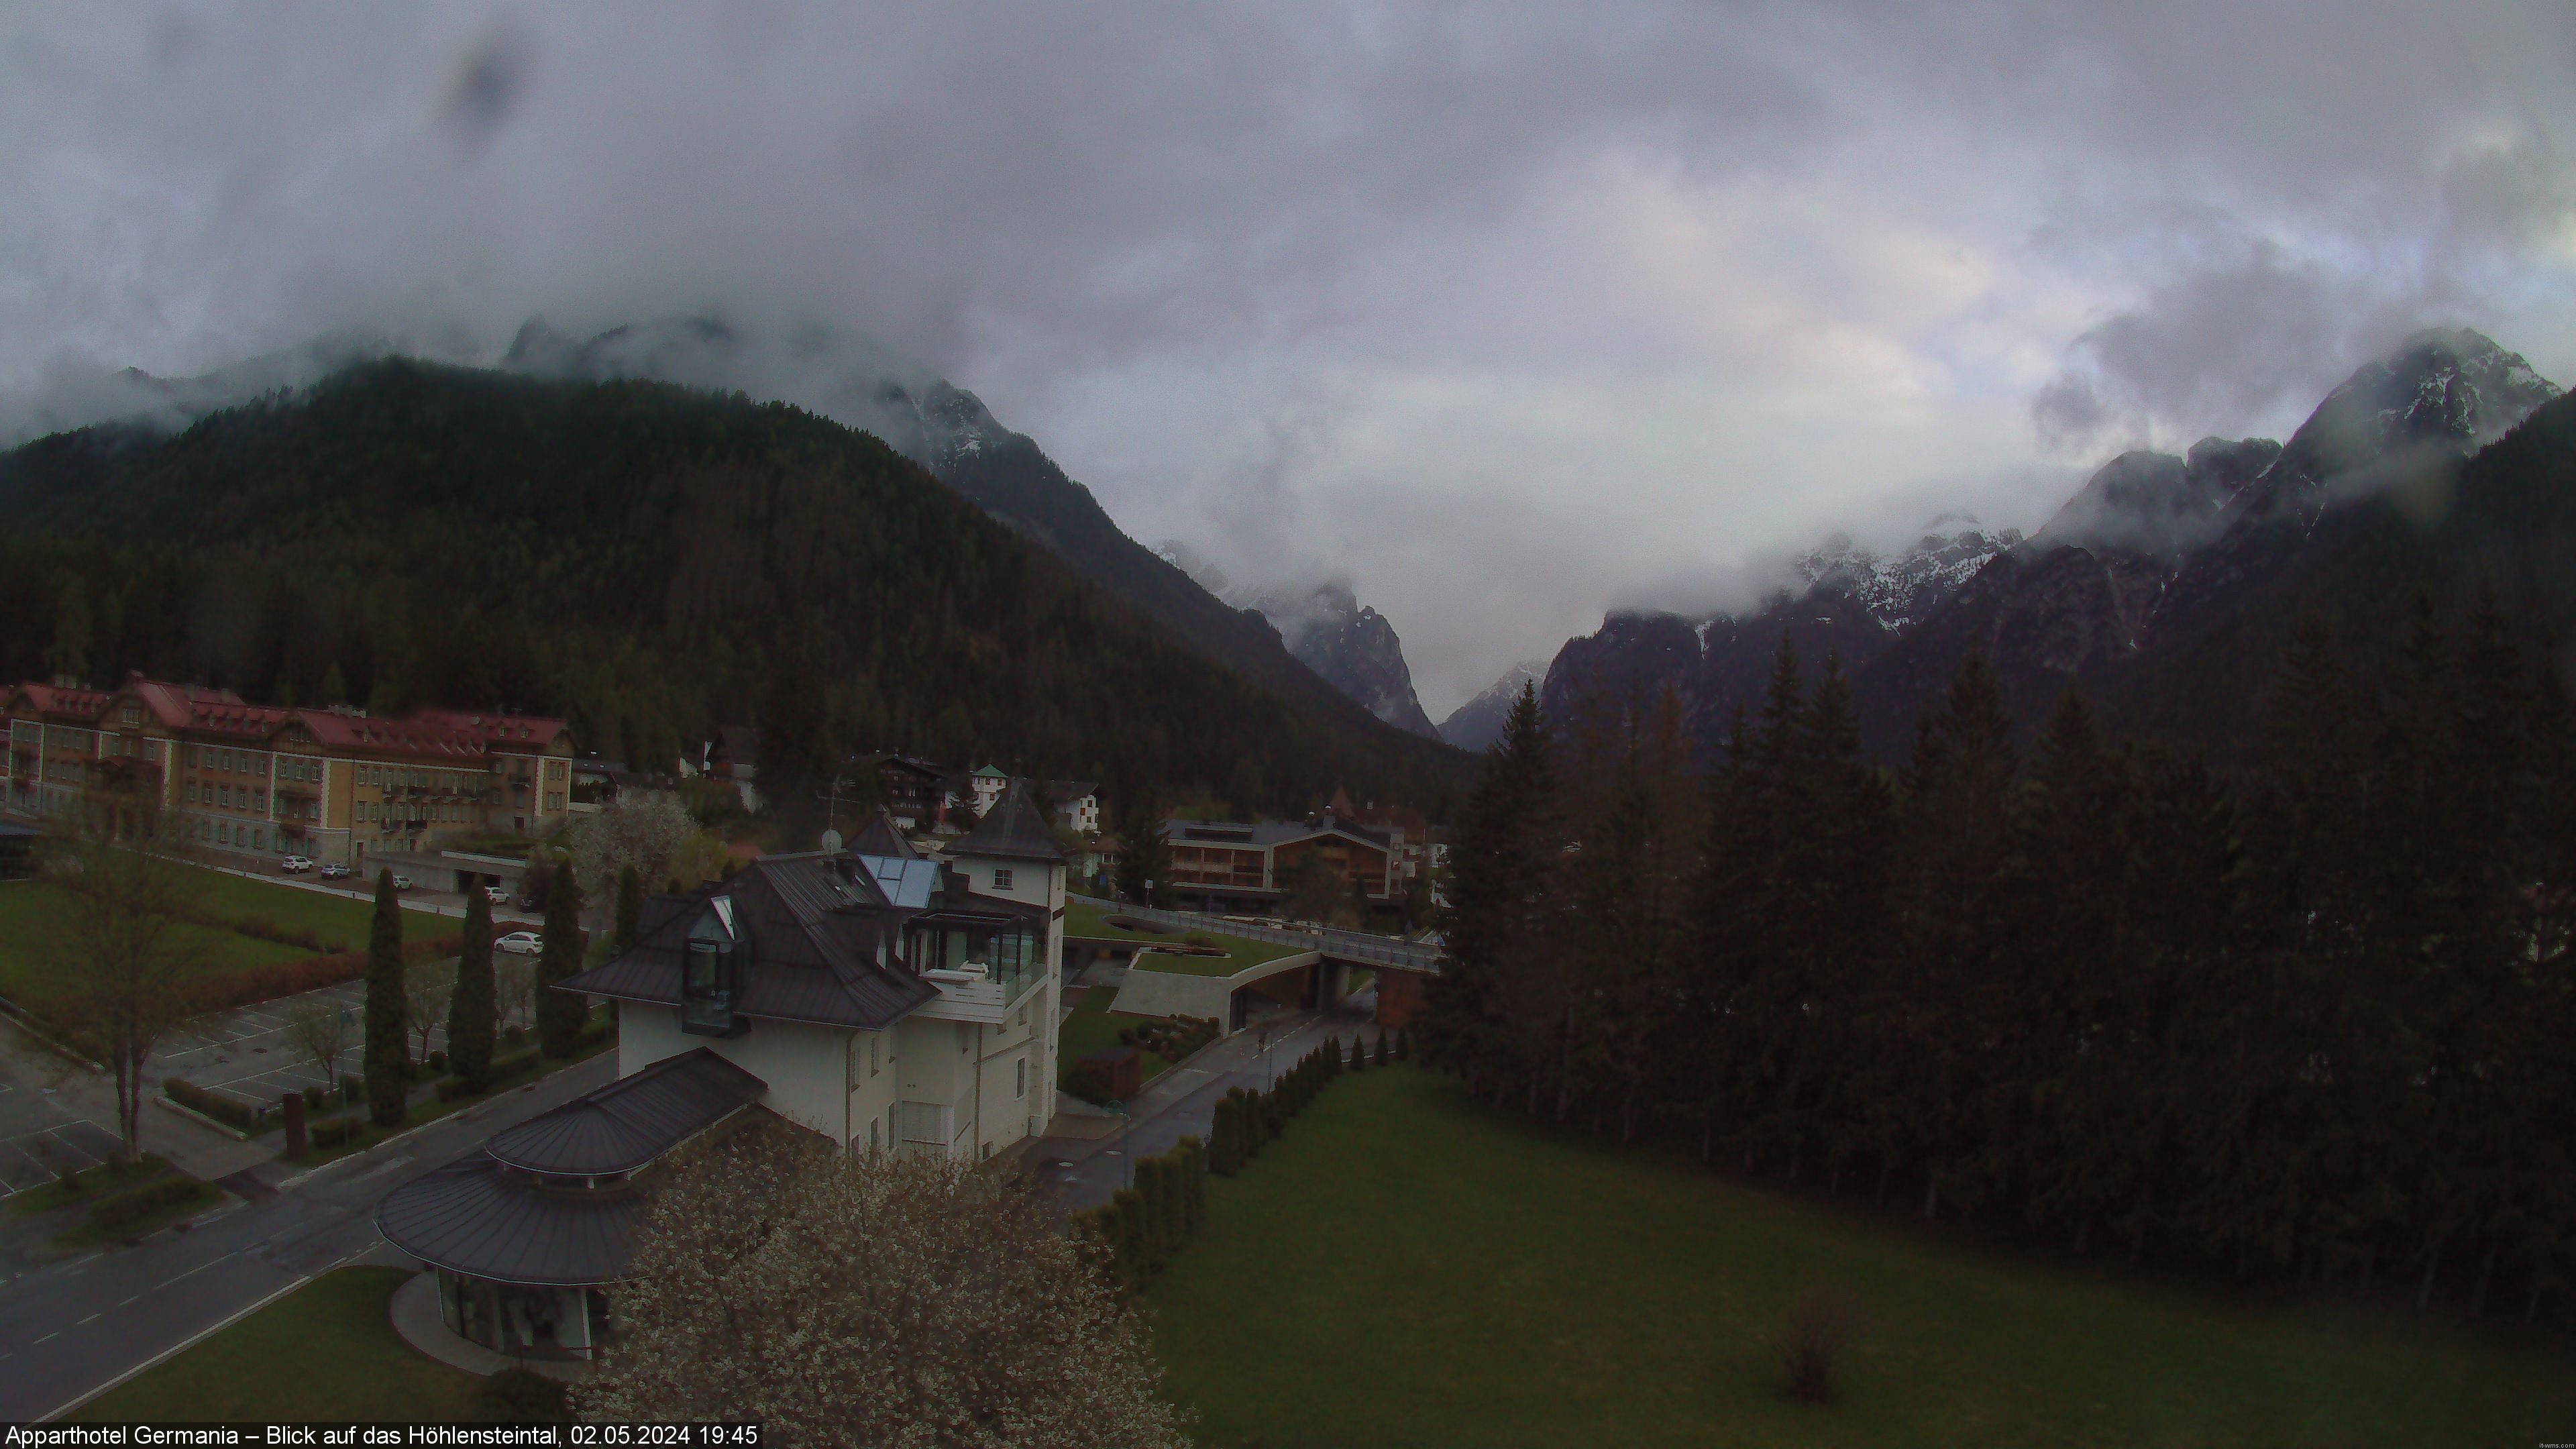 Webcam with a view of the Landro valley